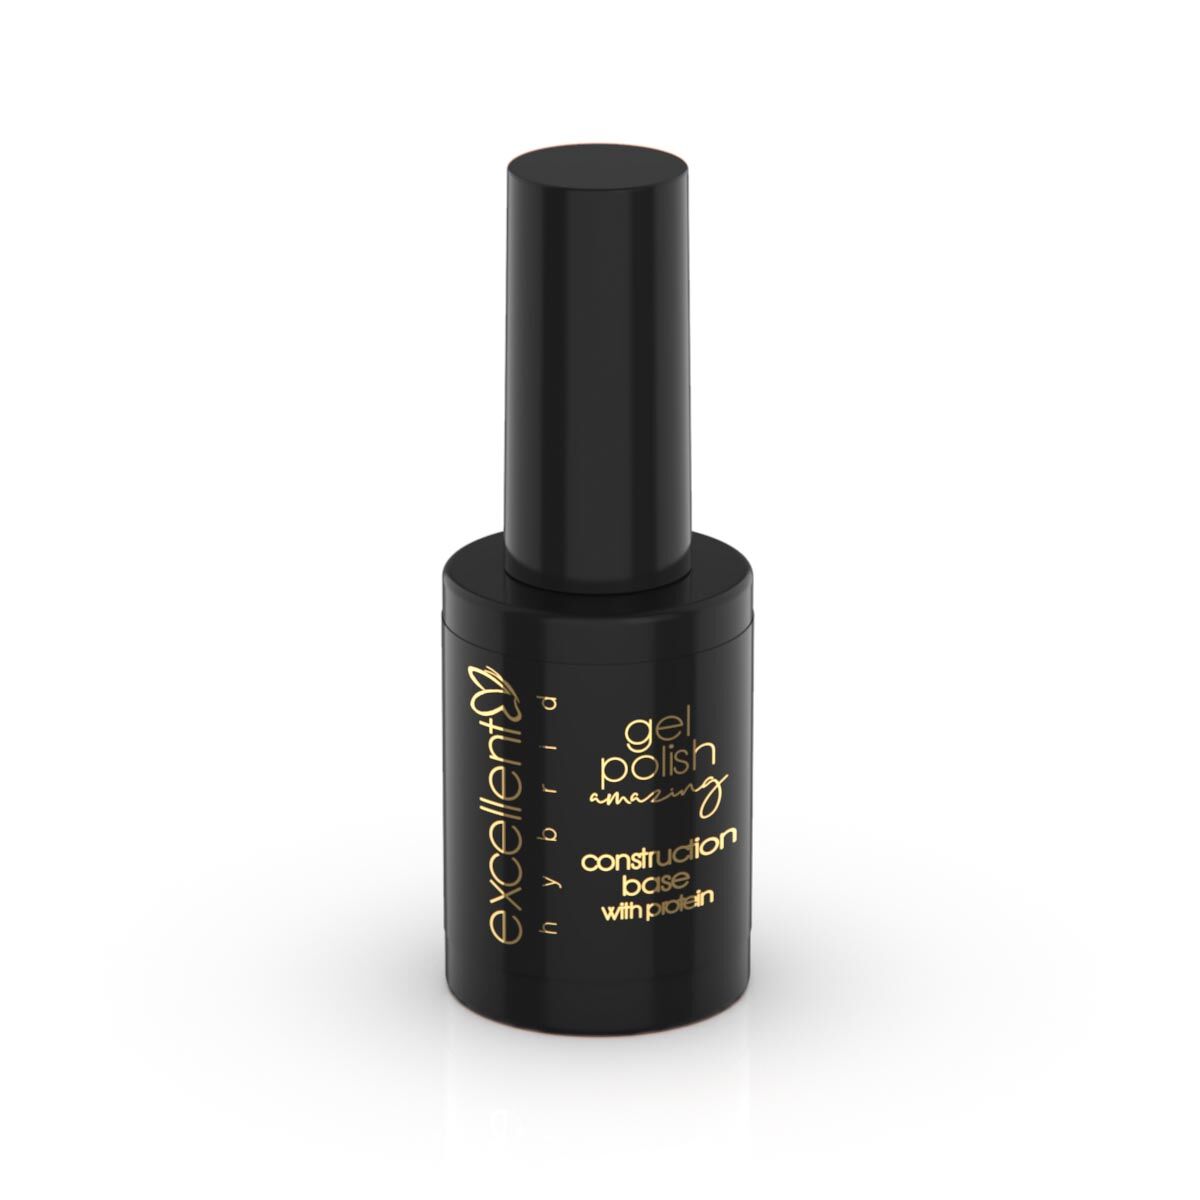 Gel Polish Construction Base with proteins 10ml